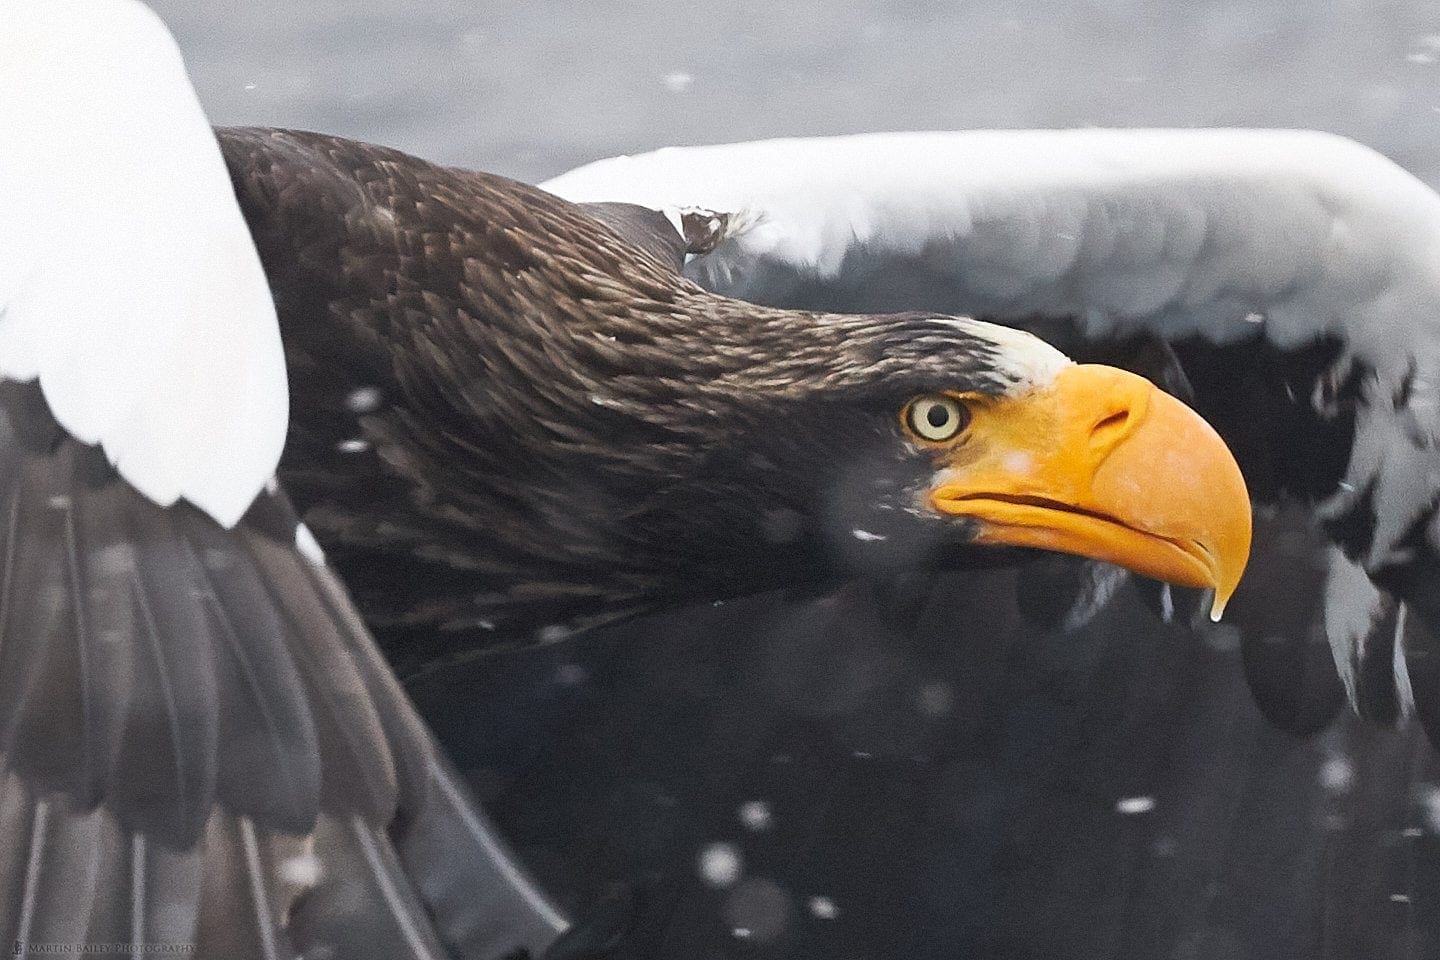 Steller's Sea Eagle Snatches Fish from Sea - 100% Crop